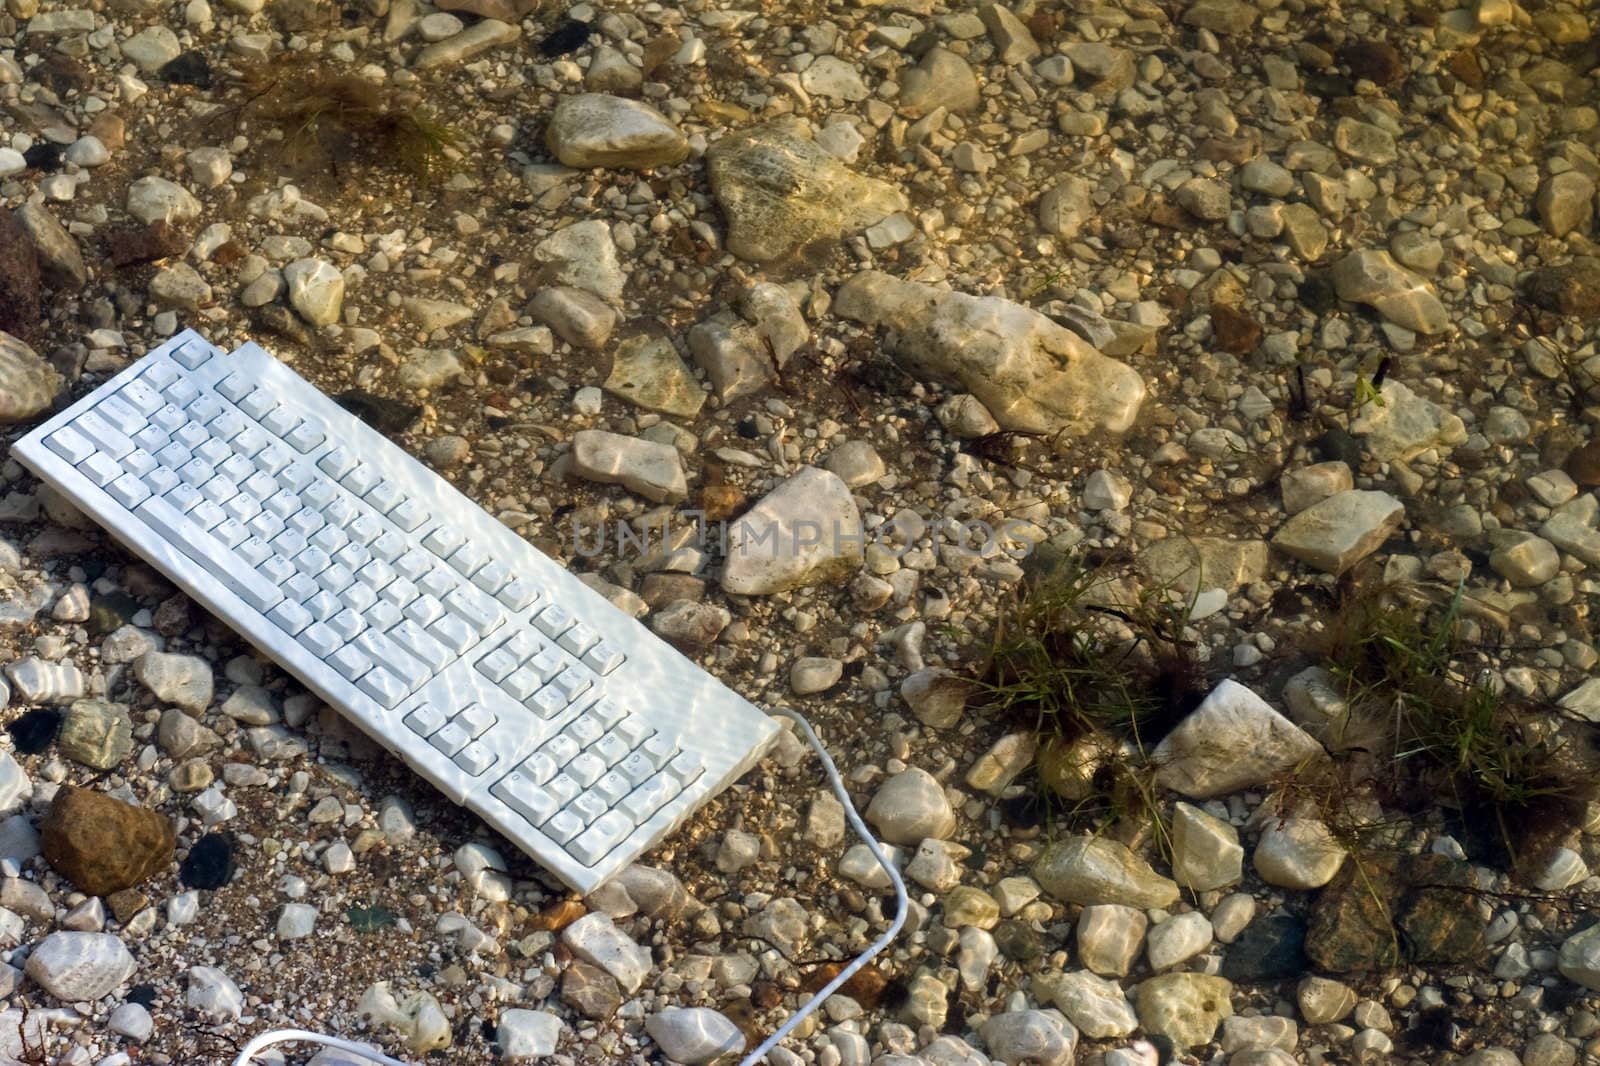 A keyboard that was thrown in the water on some rocks